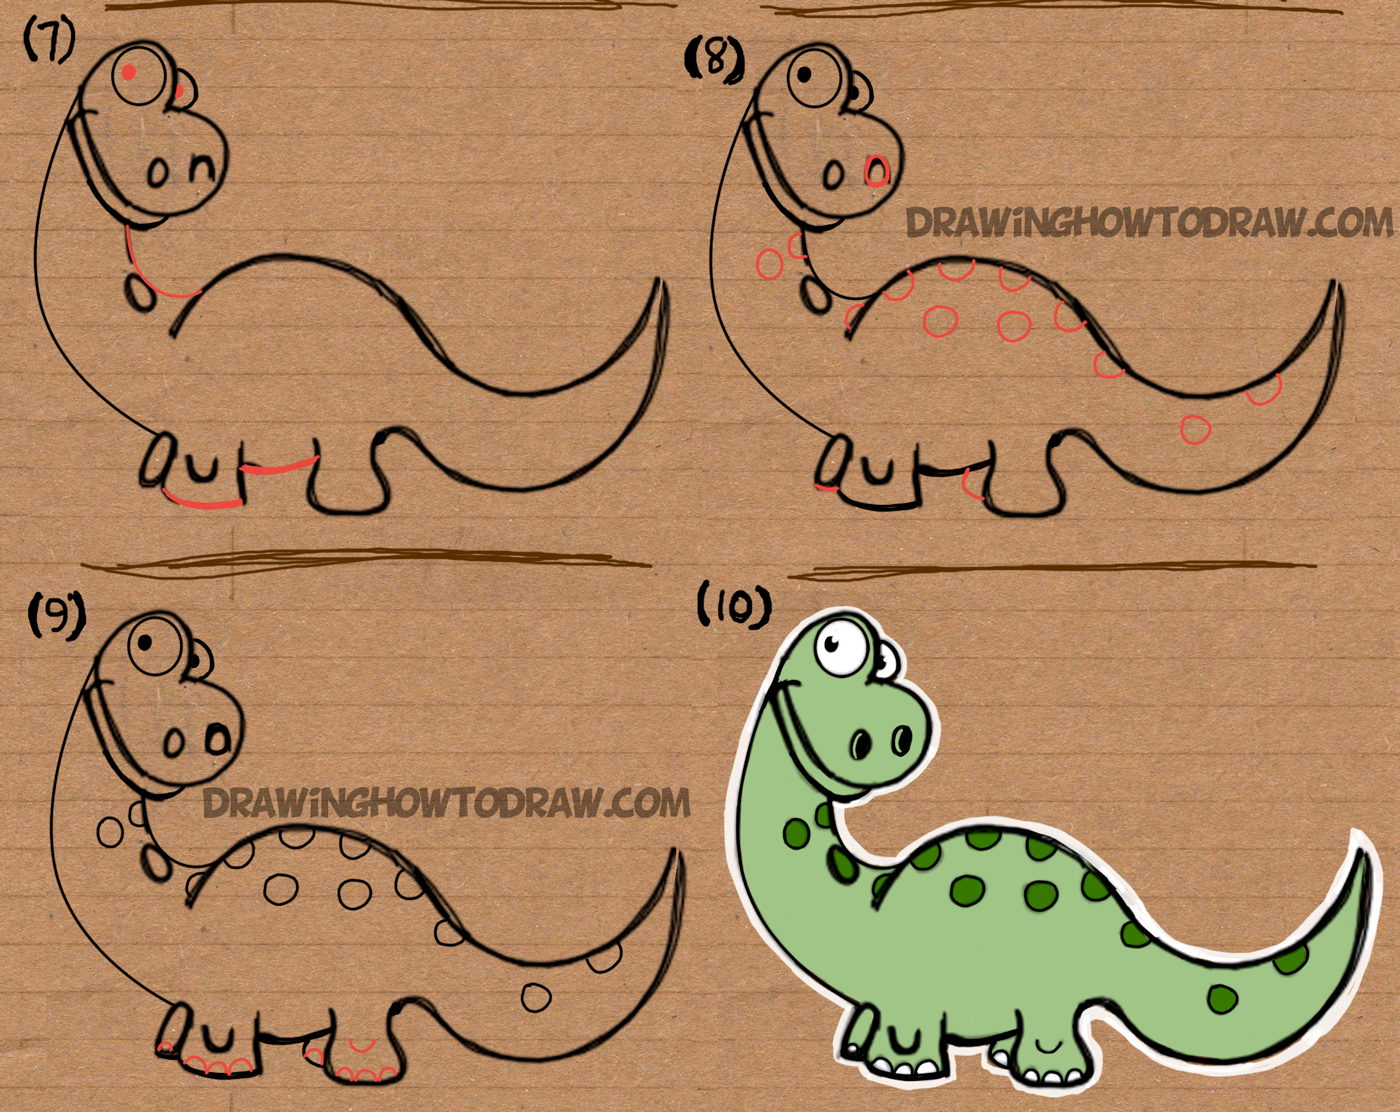 Learn how to draw a brontosaurus from brontosaurus word